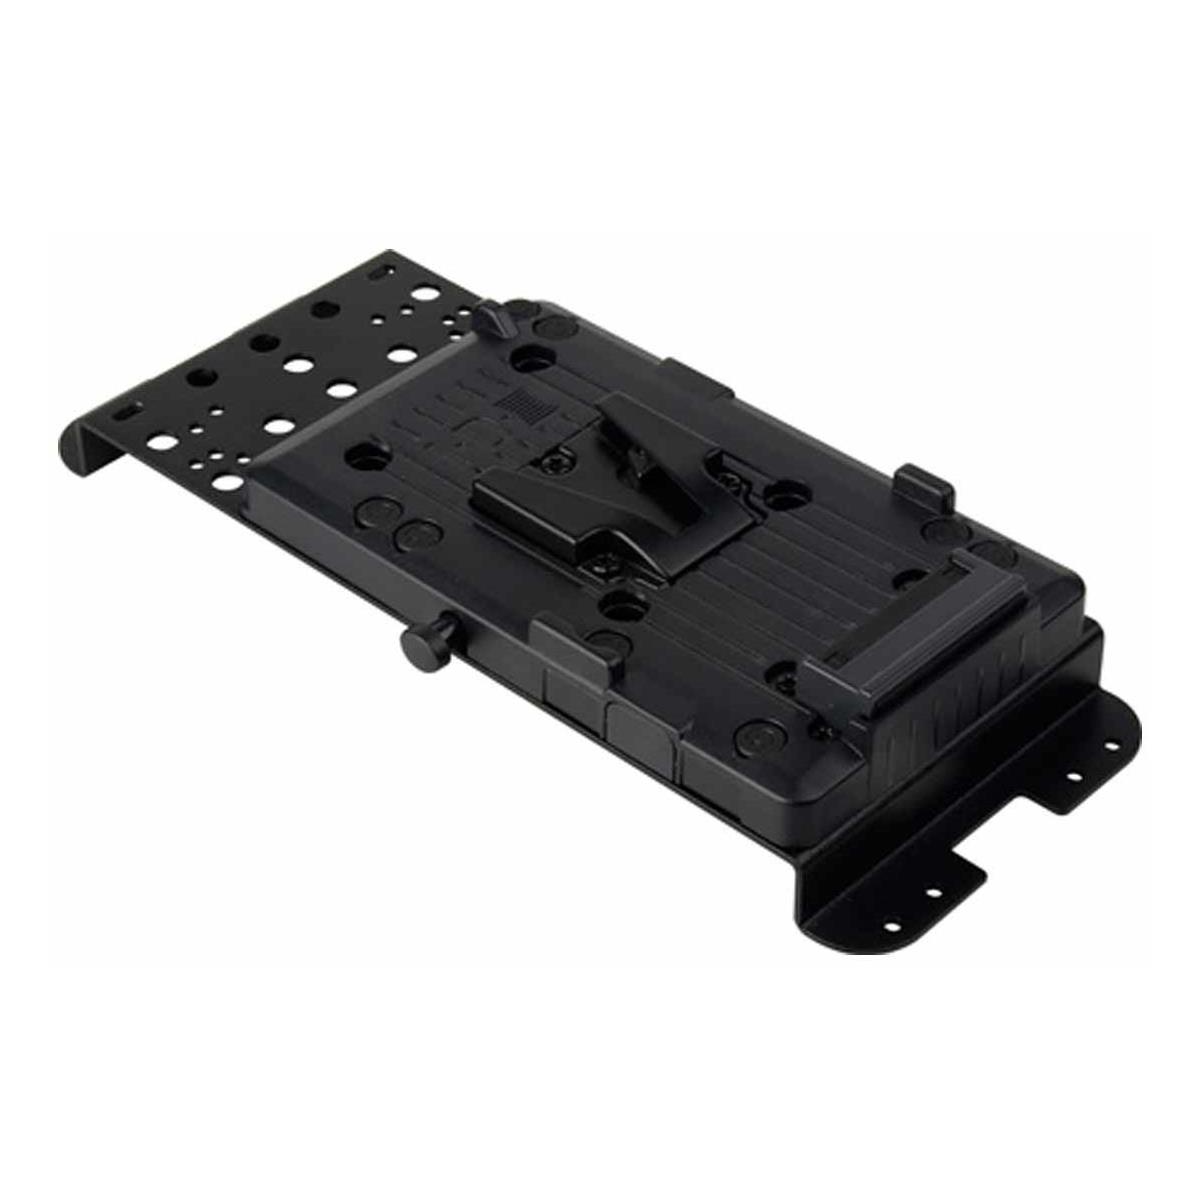 Image of Camplex Cheese Plate with V-Mount Block Power Plate for BLACKJACK-1 Adapter